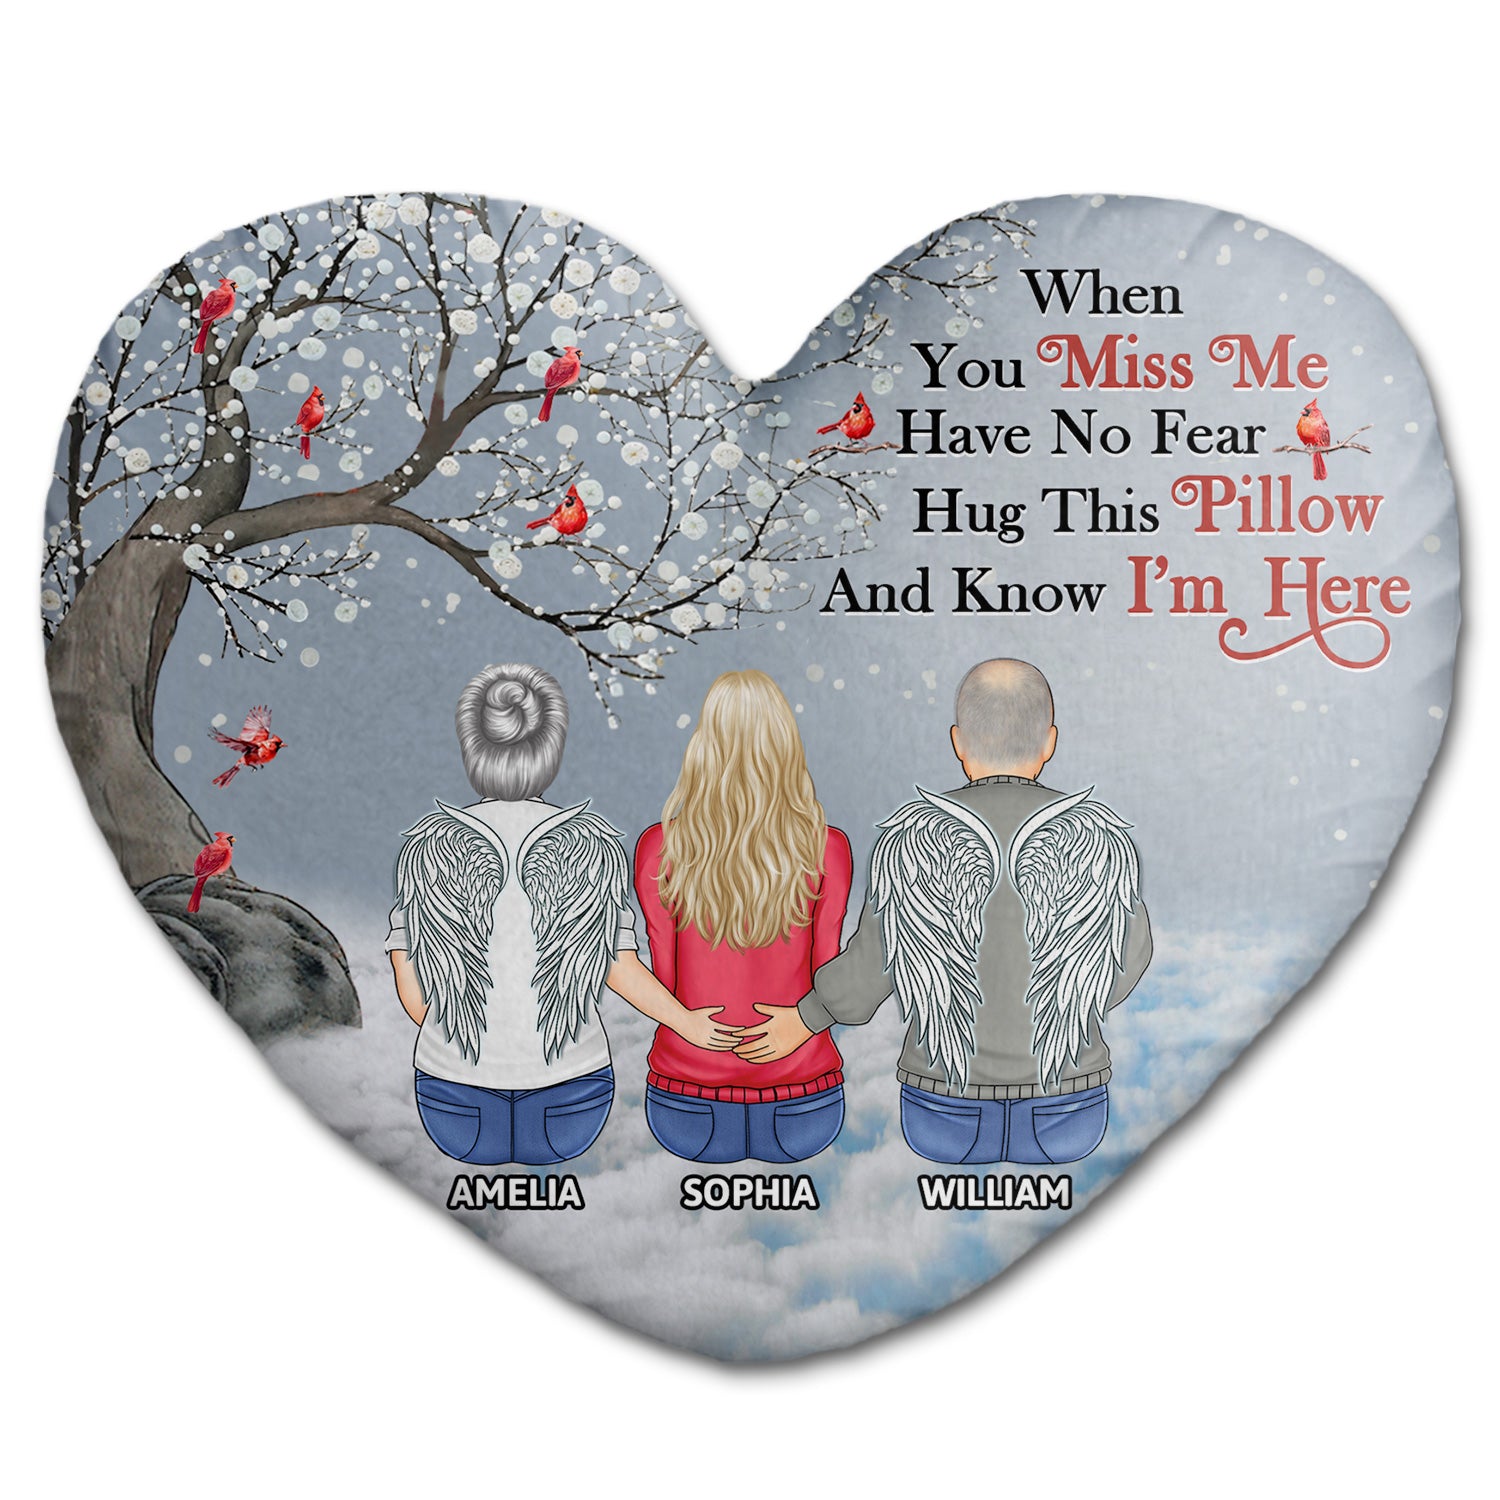 When You Miss Me - Loving, Memorial Gift For Family, Siblings, Friends - Personalized Heart Shaped Pillow